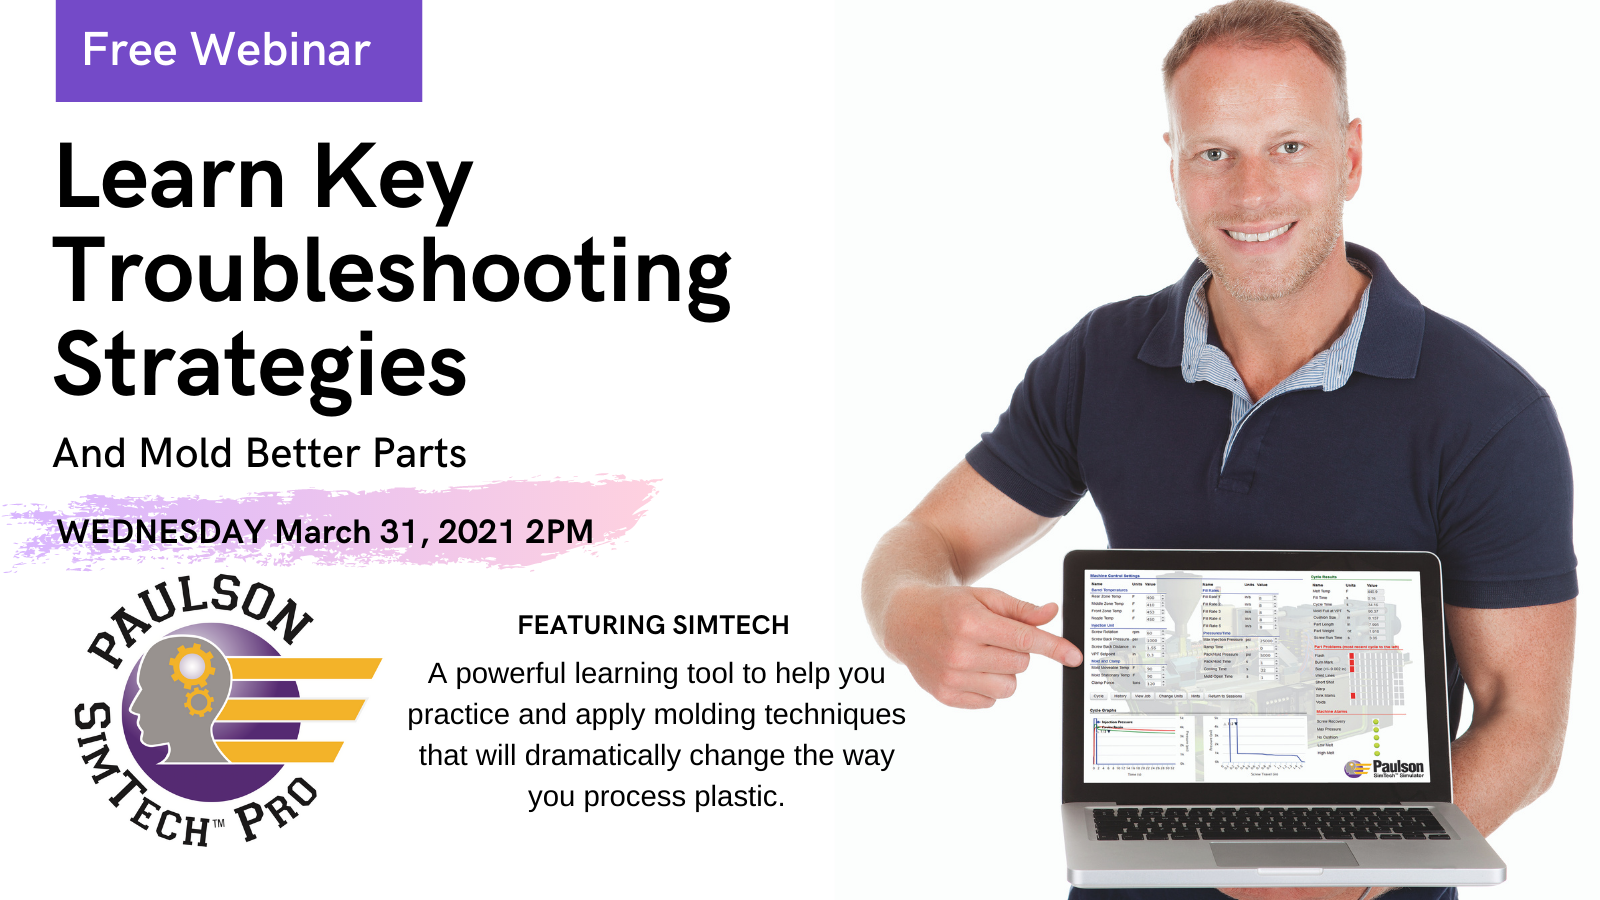 Webinar: Learn Key Troubleshooting Strategies and Mold Better Parts